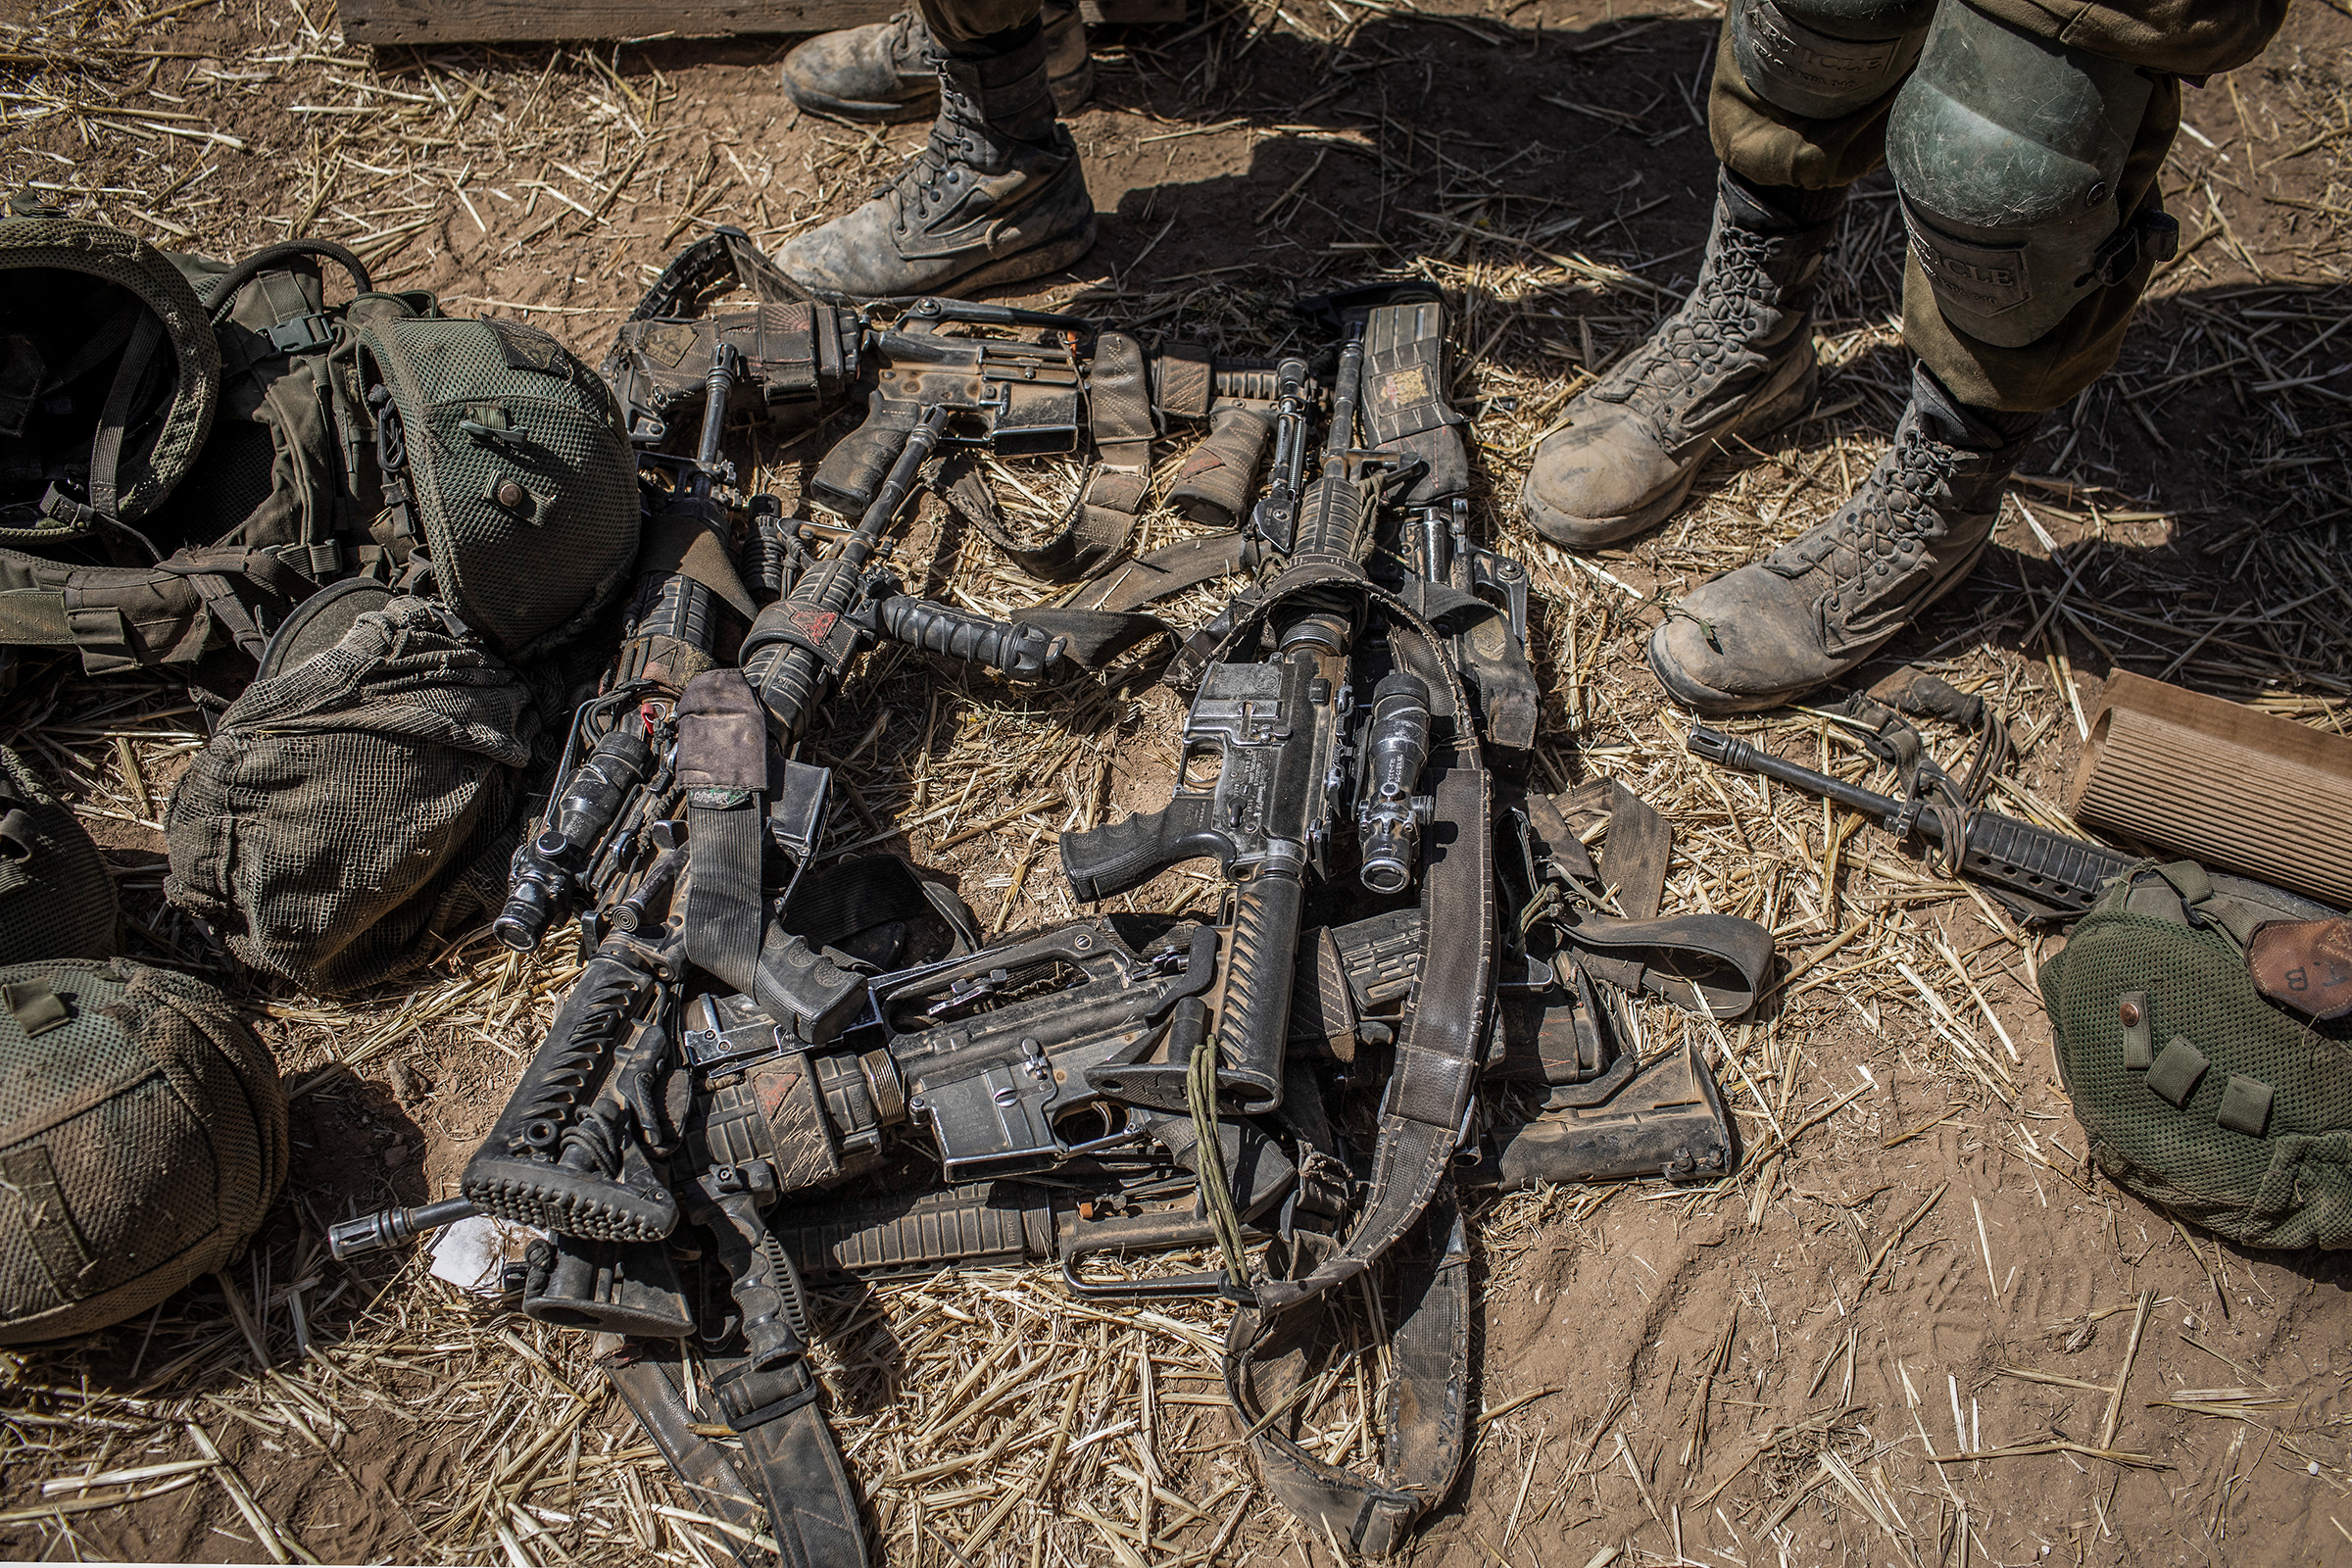 Weapons belonging to soldiers of the Israel Defense Forces near Sderot on May 19, 2021. (Ilia Yefimovich—picture alliance/Getty Images)